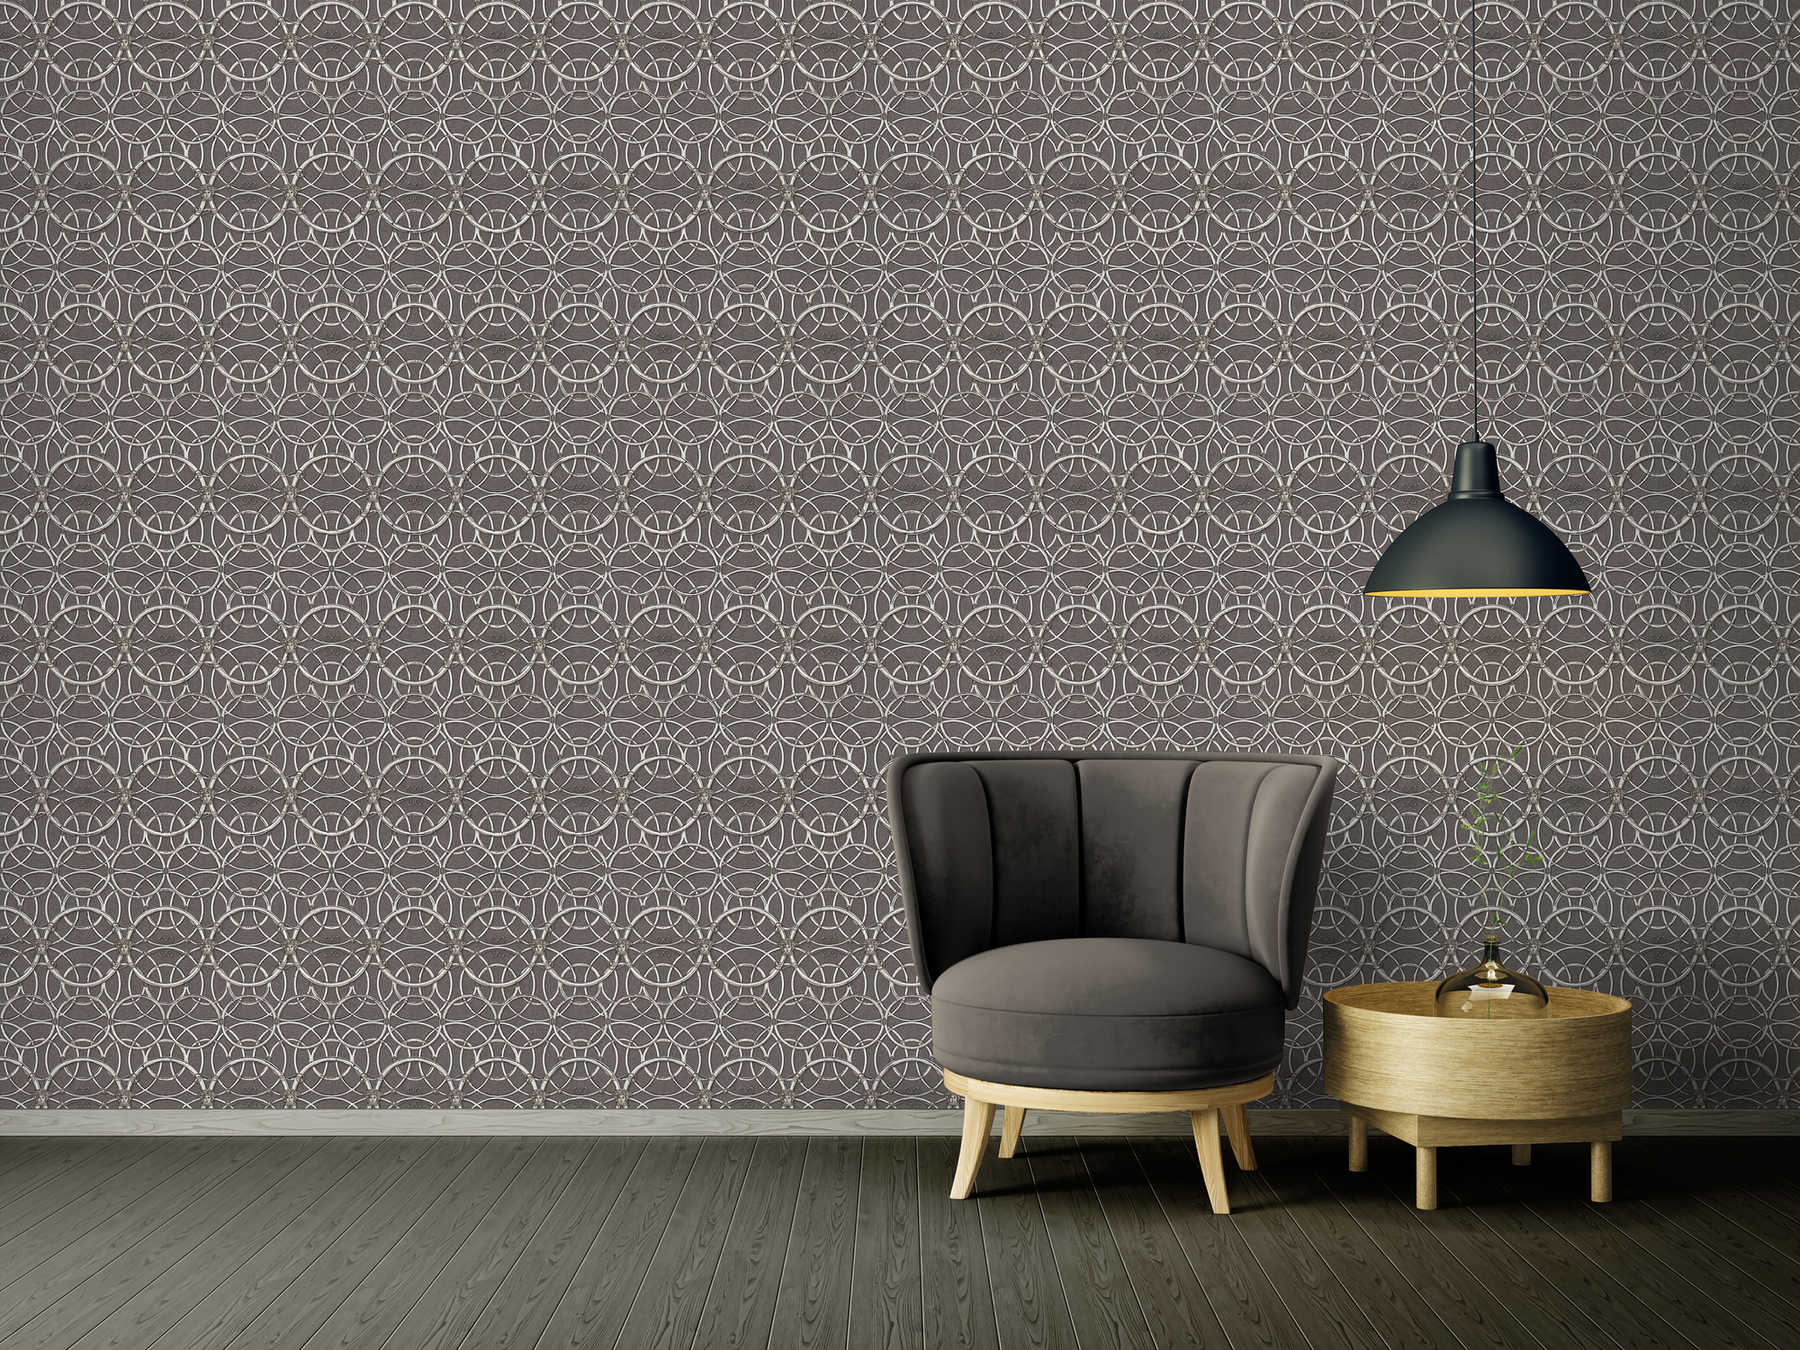             VERSACE Home wallpaper circle pattern and Medusa - silver, grey
        